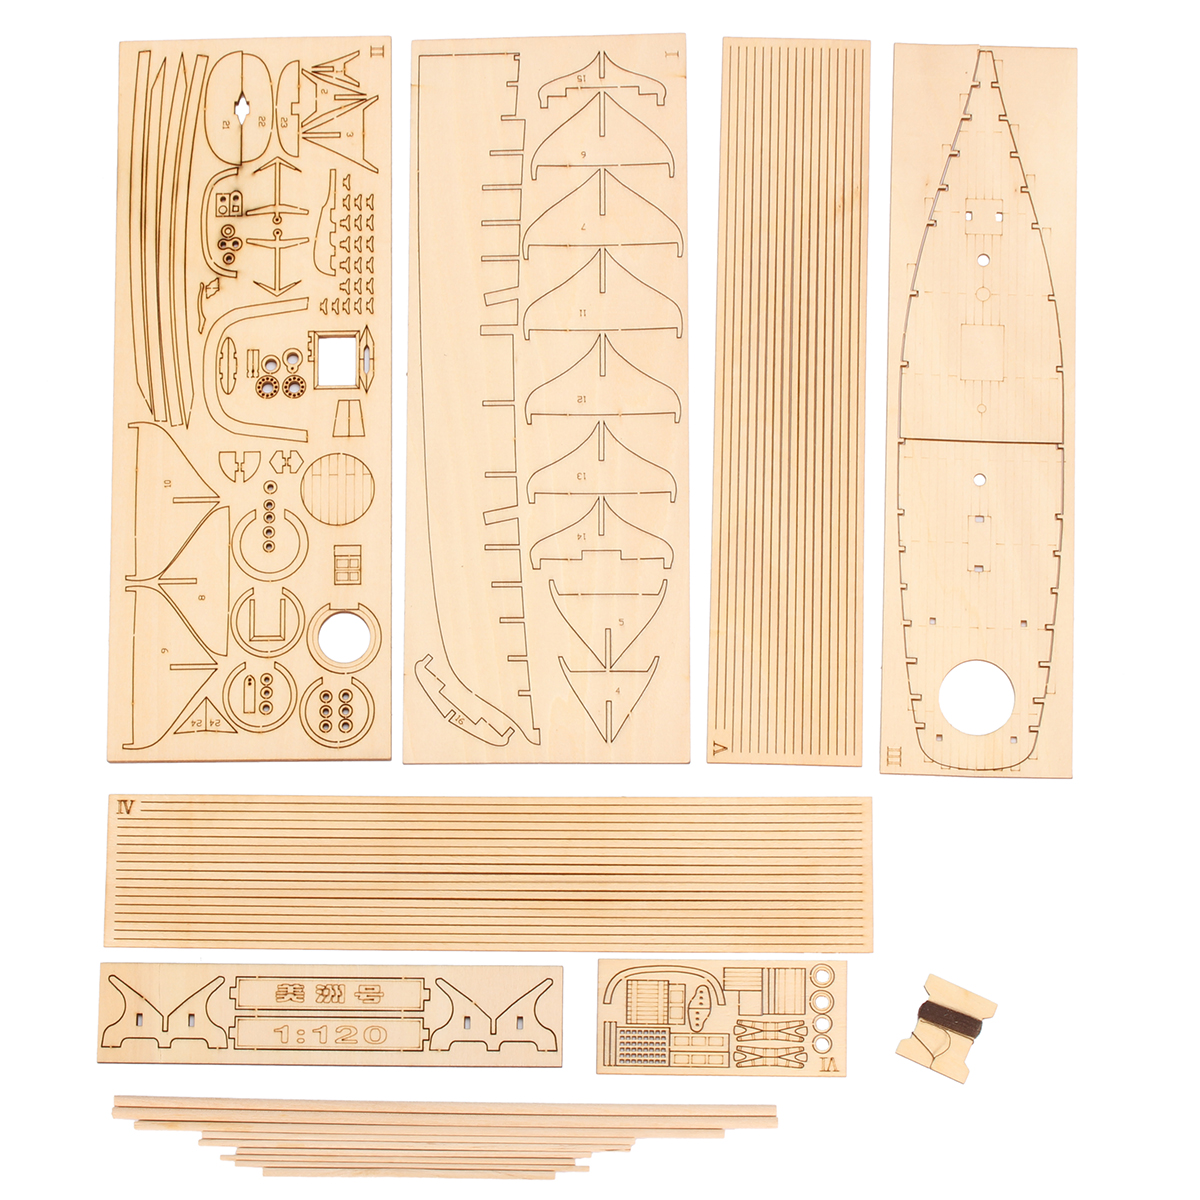 1120-Scale-Wooden-Wood-Sailboat-Ship-Kits-3D-Puzzle-Model-Building-Decoration-Boat-Gift-Toy-1352894